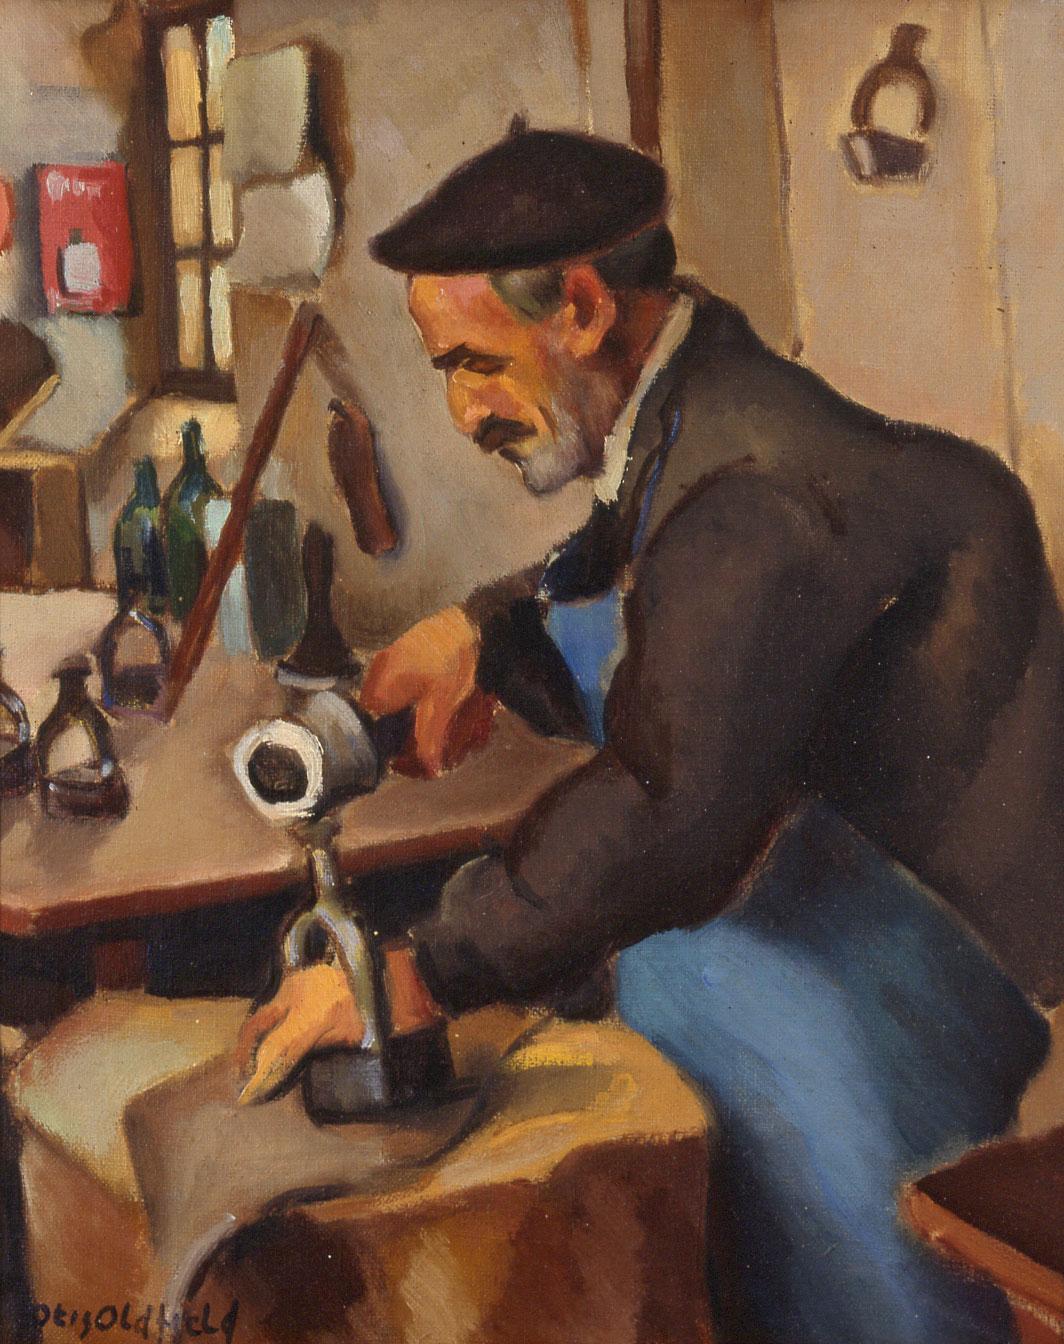 Otis Oldfield Interior Painting - "Old Shoemaker" Ashcan 20th Century Modernism 1924 California WPA Realism Worker